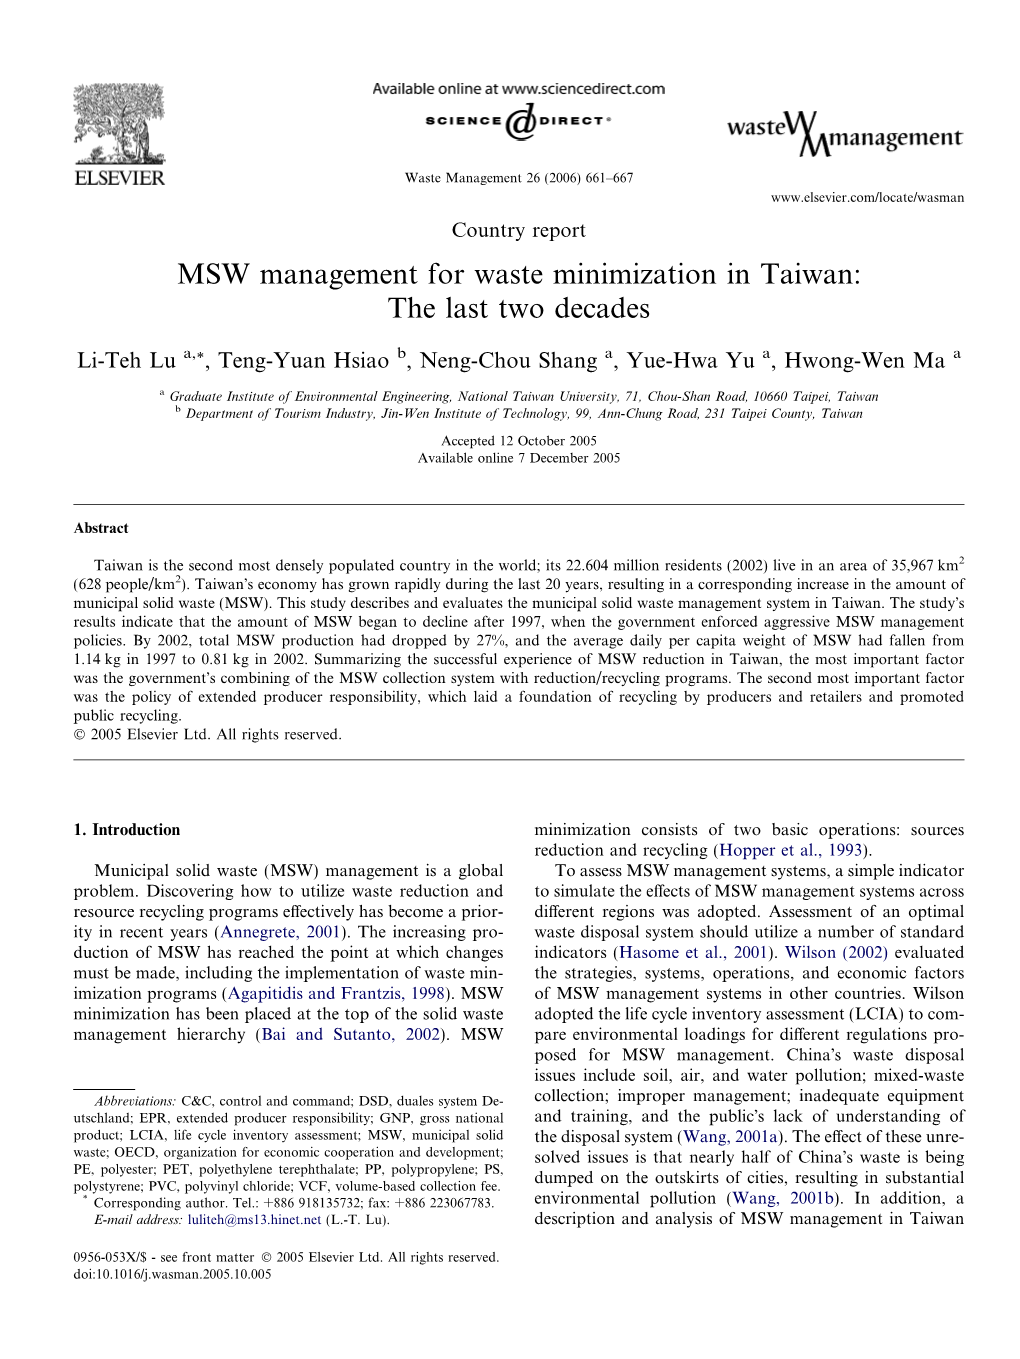 MSW Management for Waste Minimization in Taiwan: the Last Two Decades